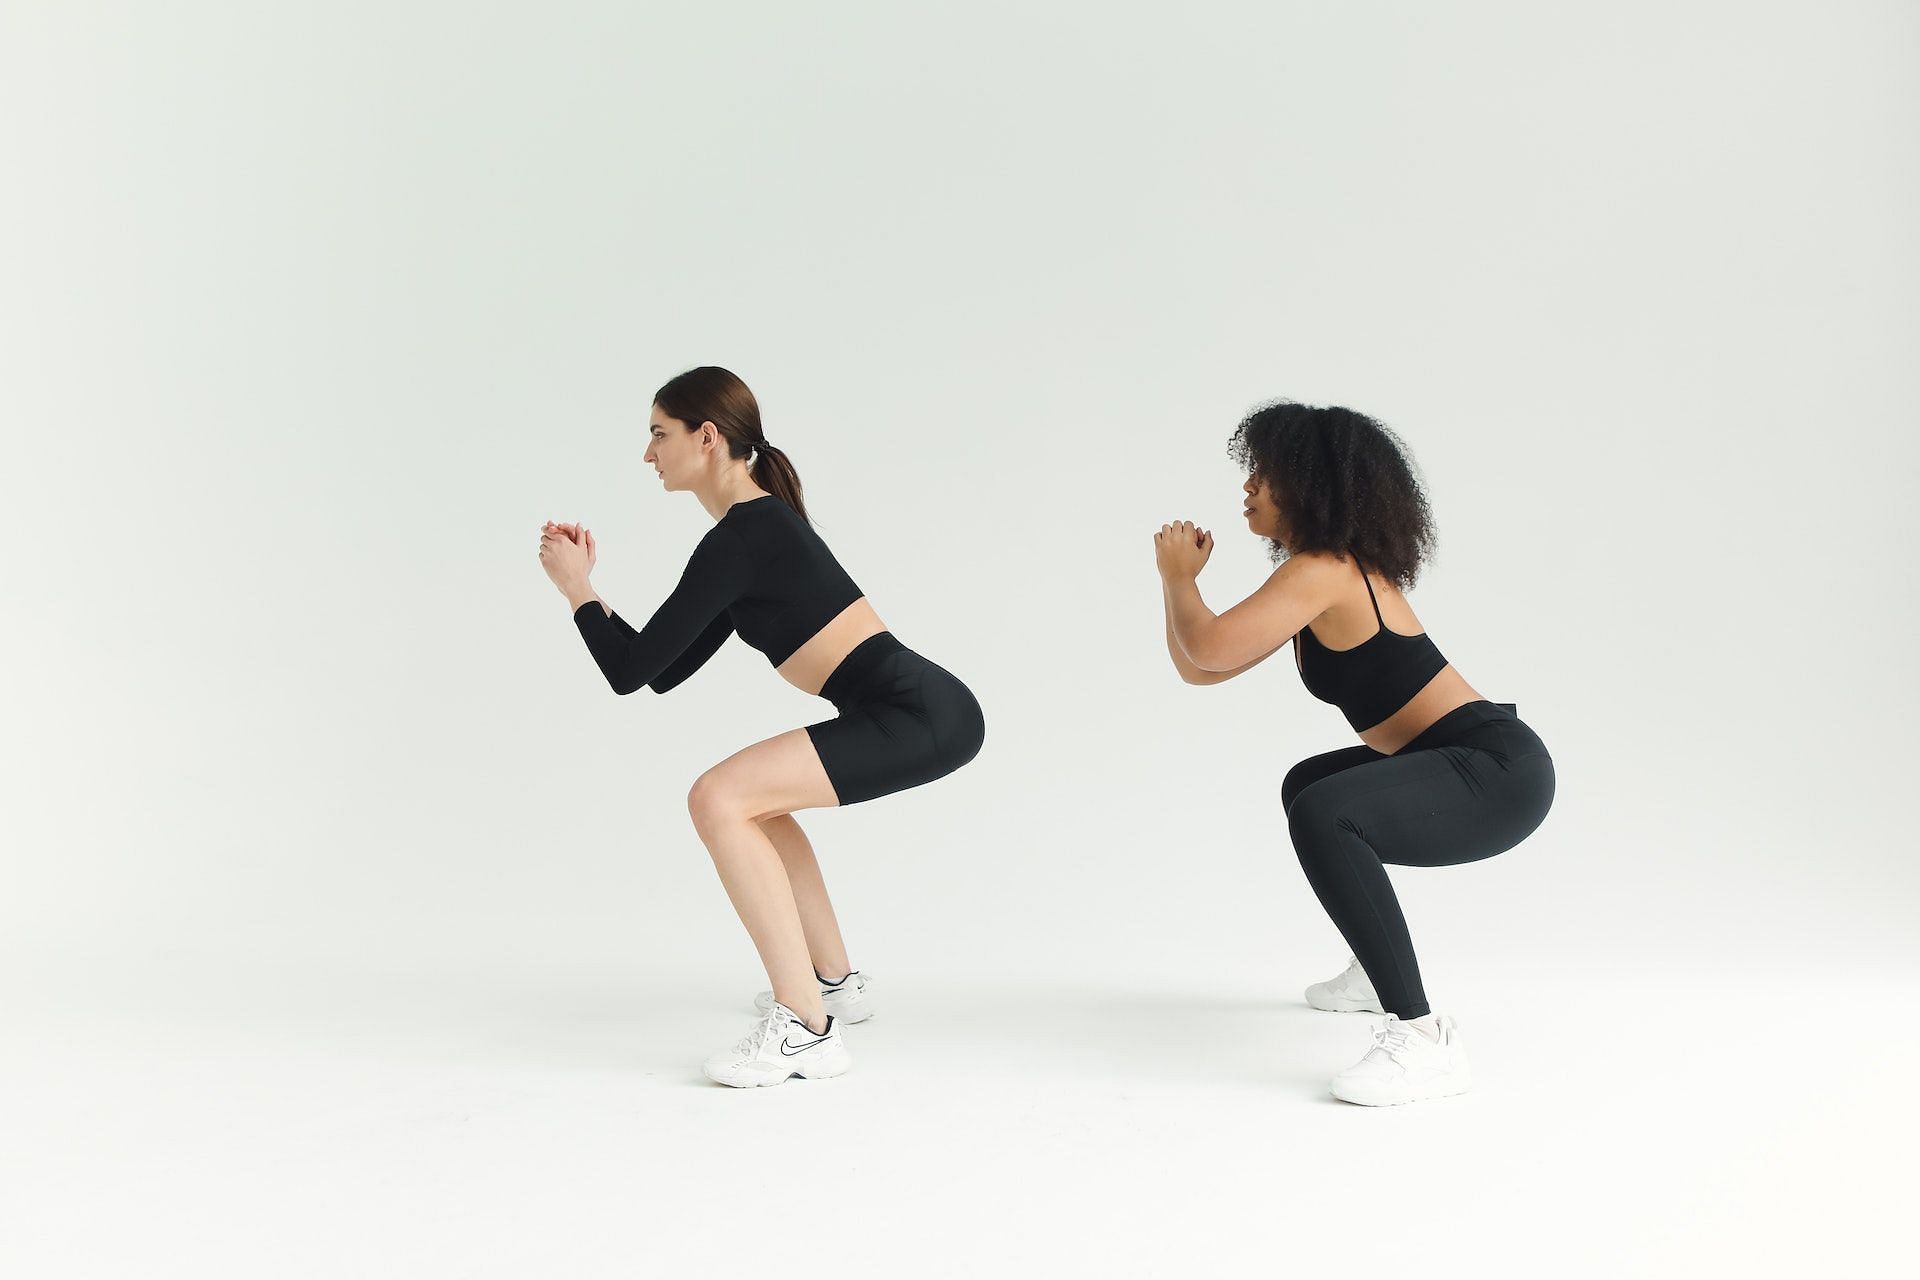 It is important to master easy squat variations before moving onto pistol squats. (Photo via Pexels/Polina Tankilevitch)